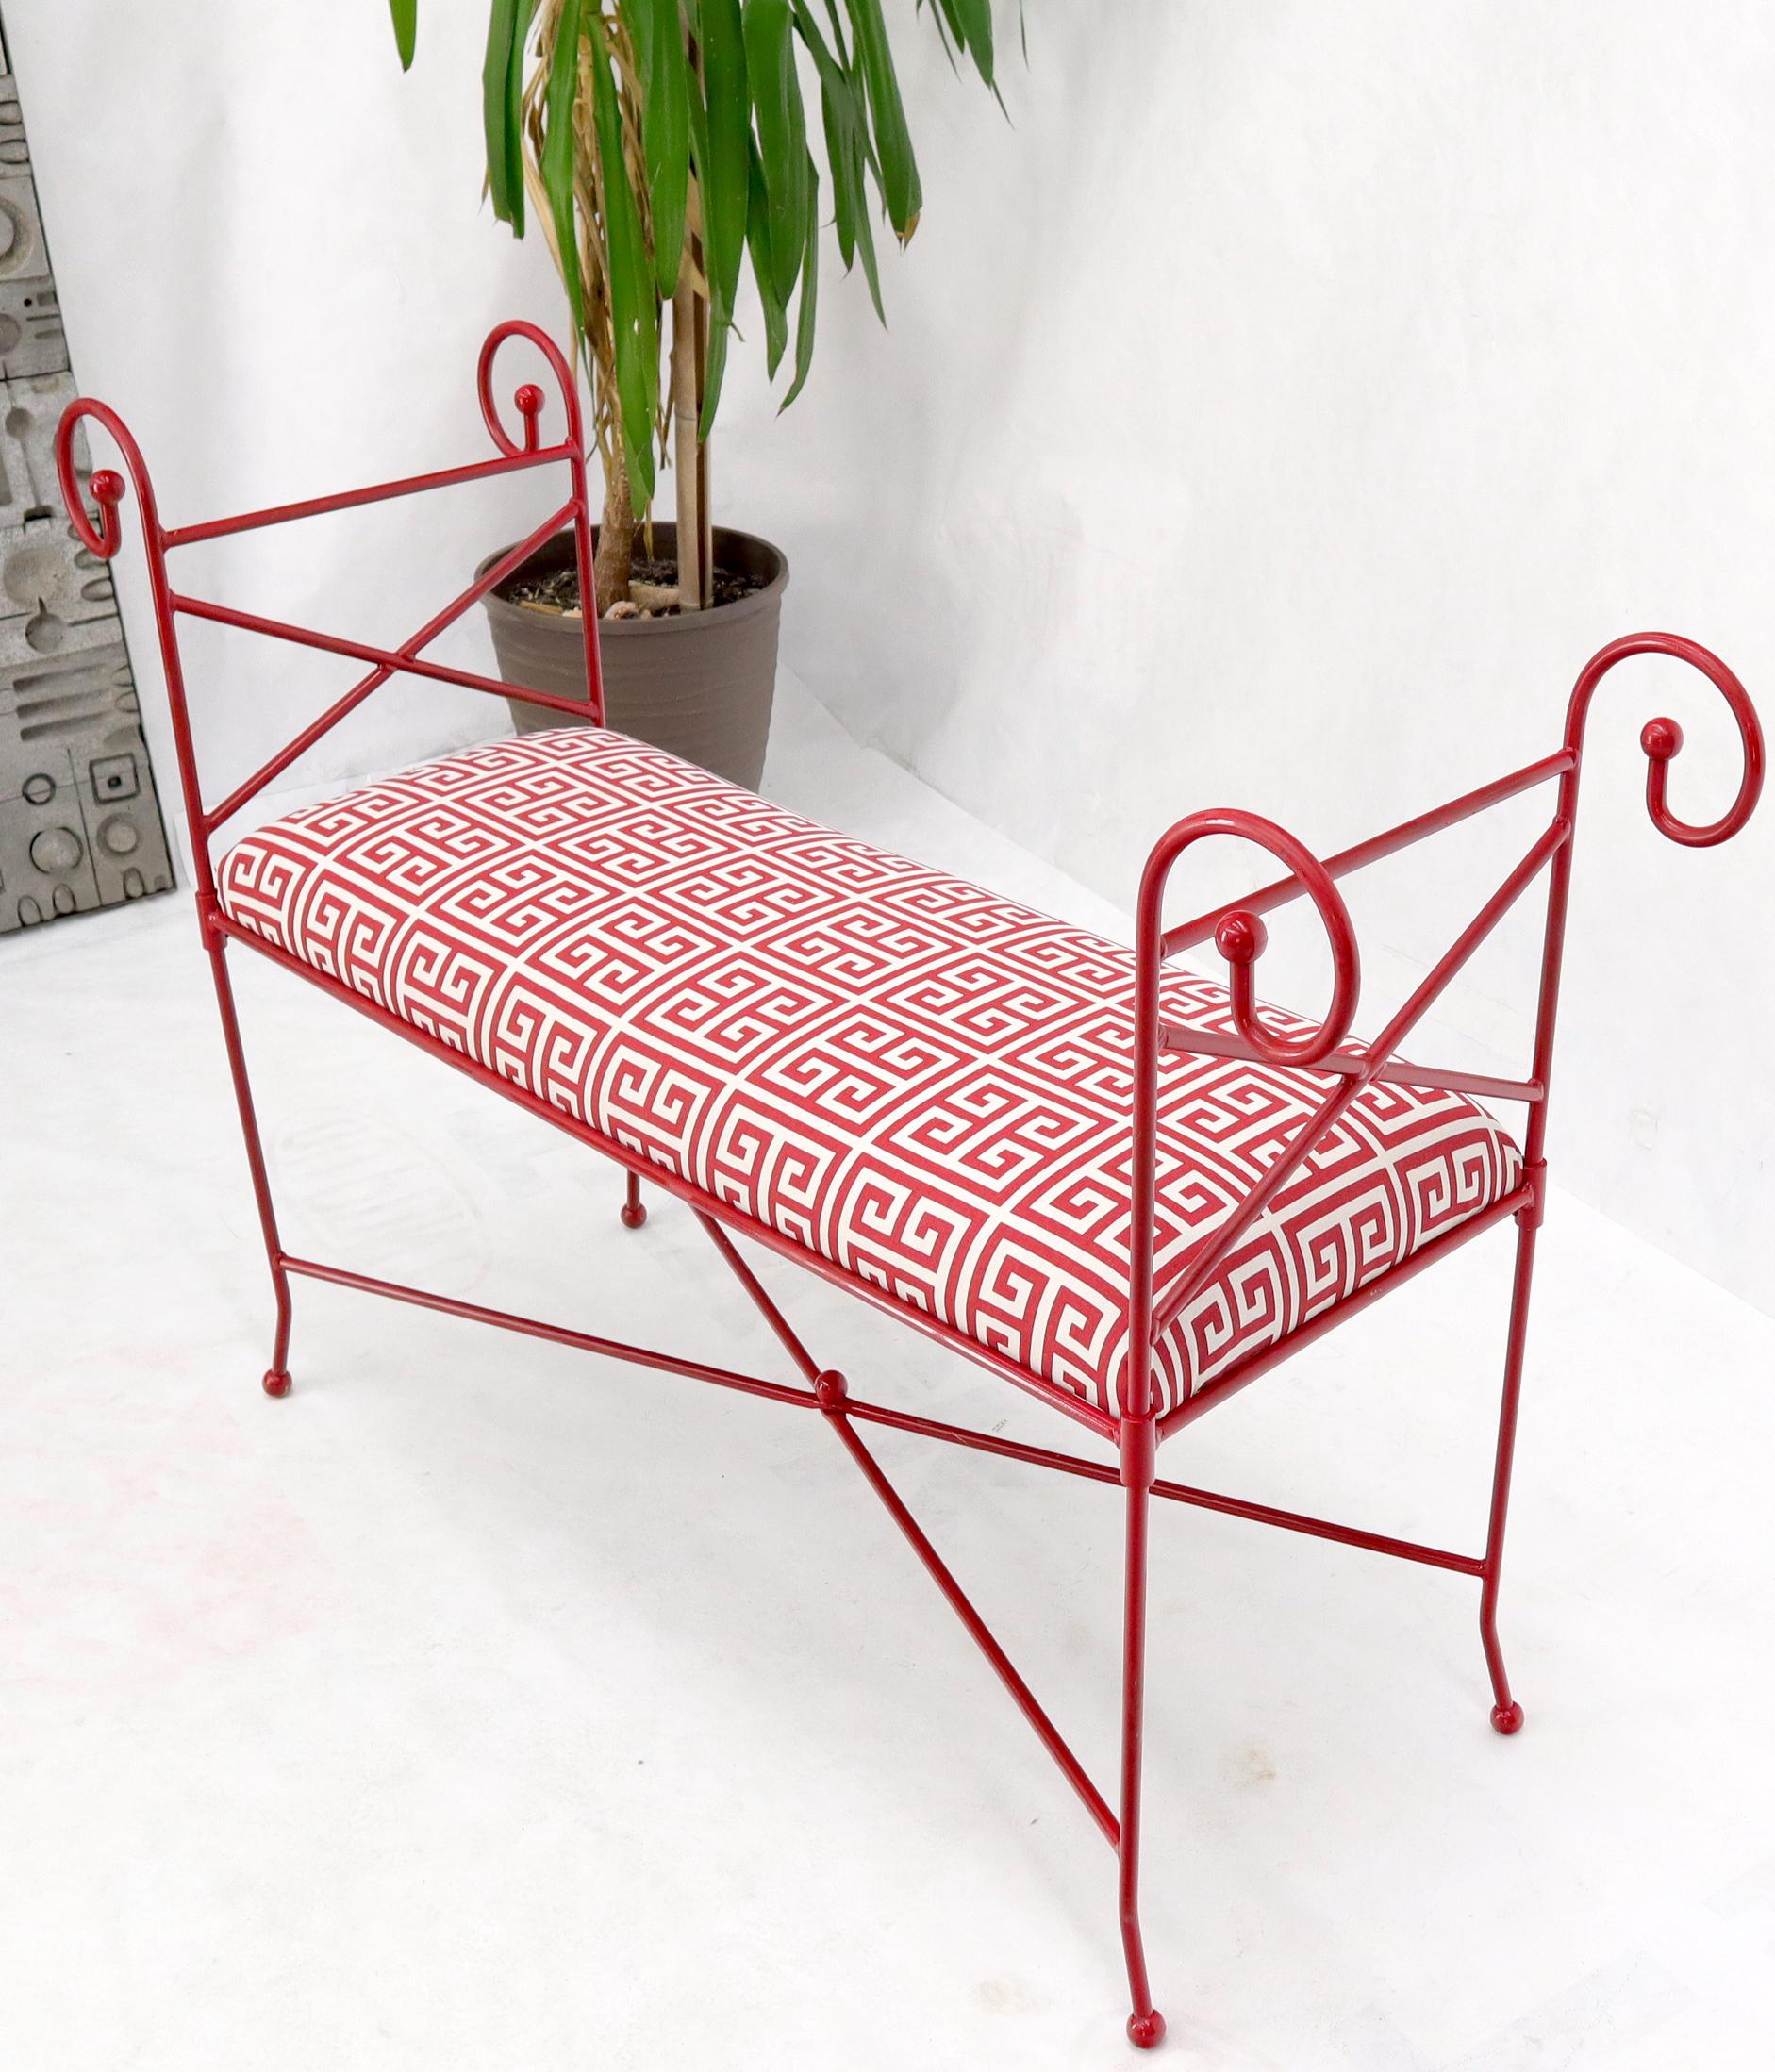 Fully restored Mid-Century Modern wrought iron window bench. New fire red lacquer finish and new Greek key style fabric upholstery.